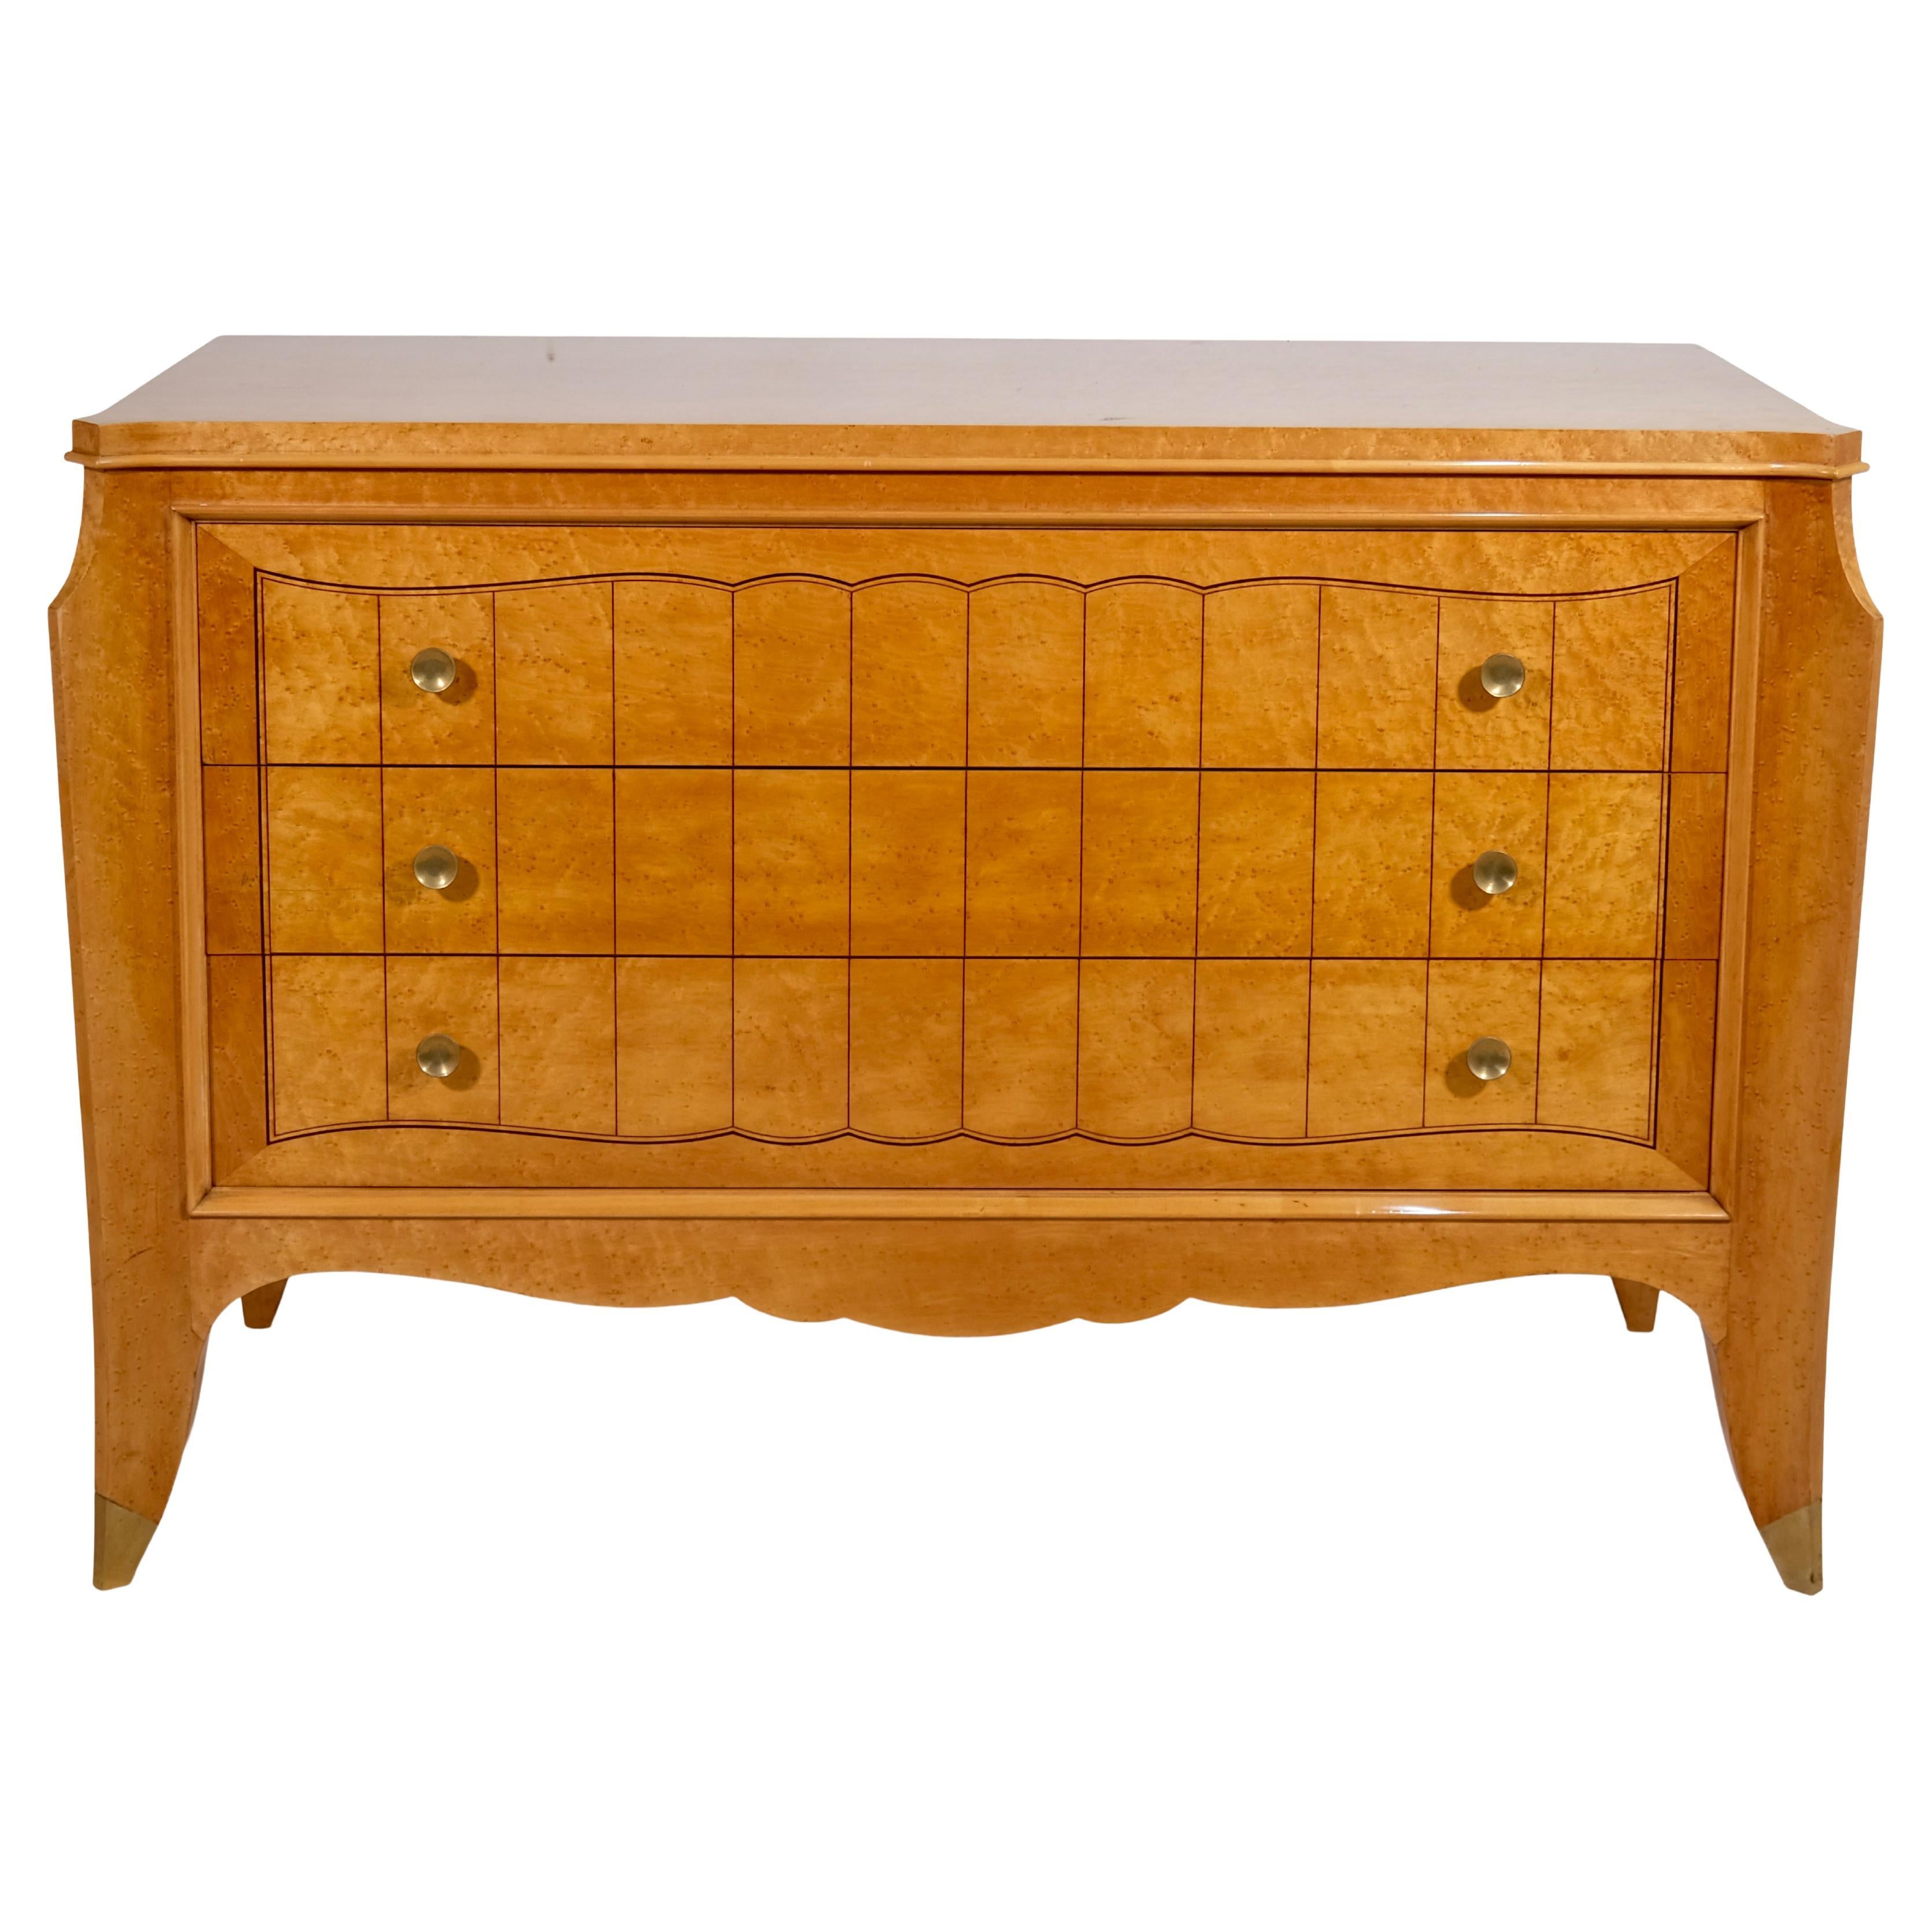 French 1930s Jean Pascaud Art Deco Chest Of Drawers in Birdseye Maple For Sale